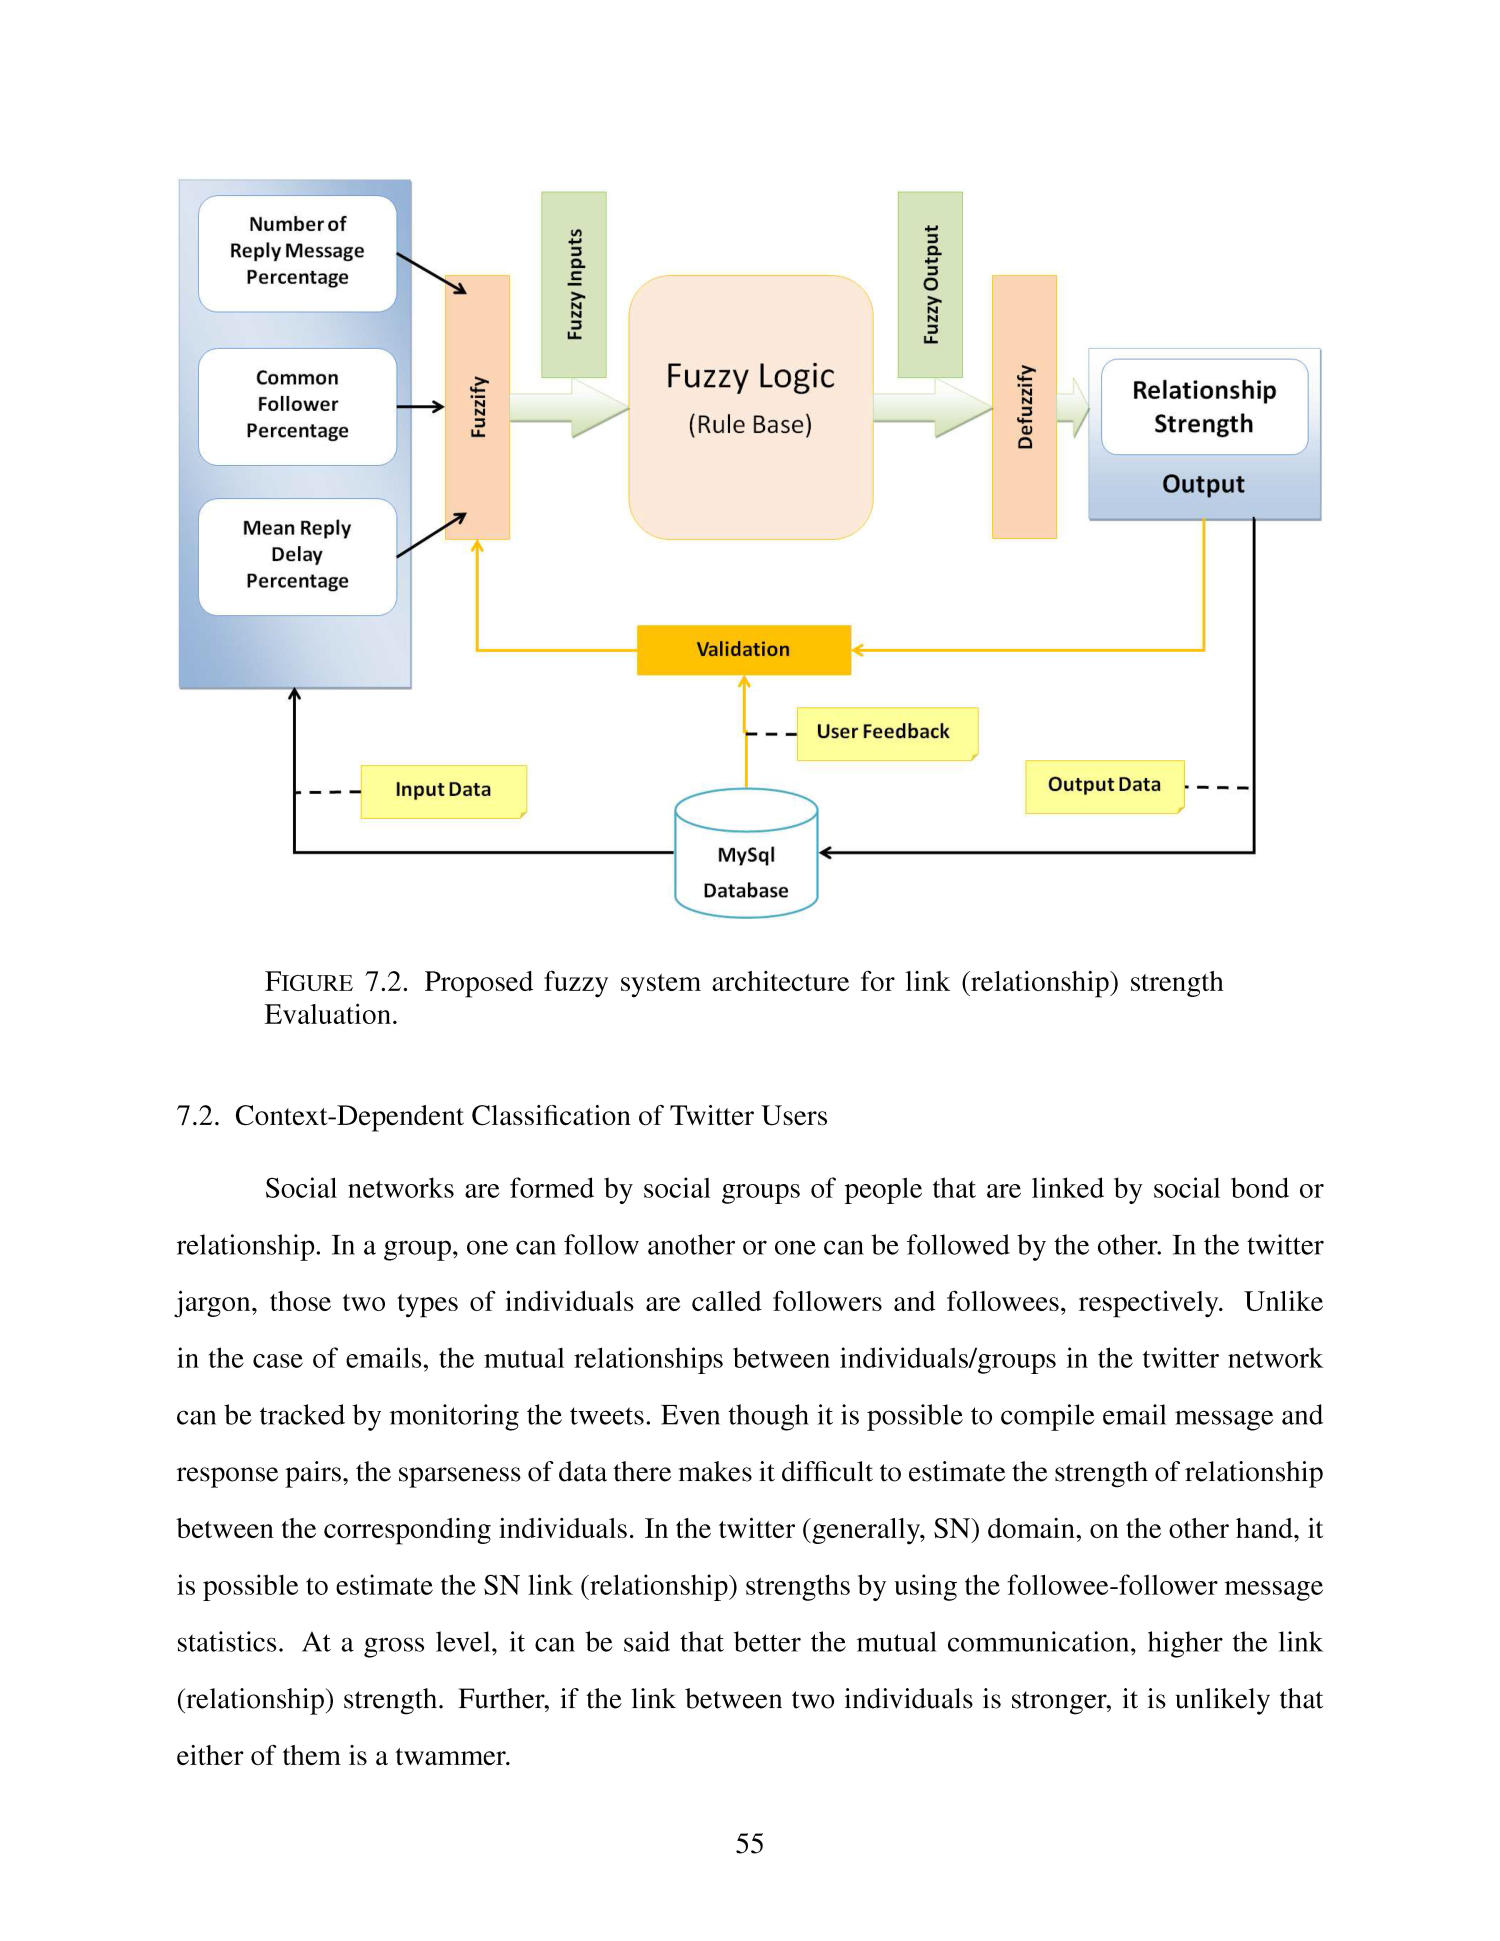 Modeling and Analysis of Intentional And Unintentional Security Vulnerabilities in a Mobile Platform
                                                
                                                    55
                                                